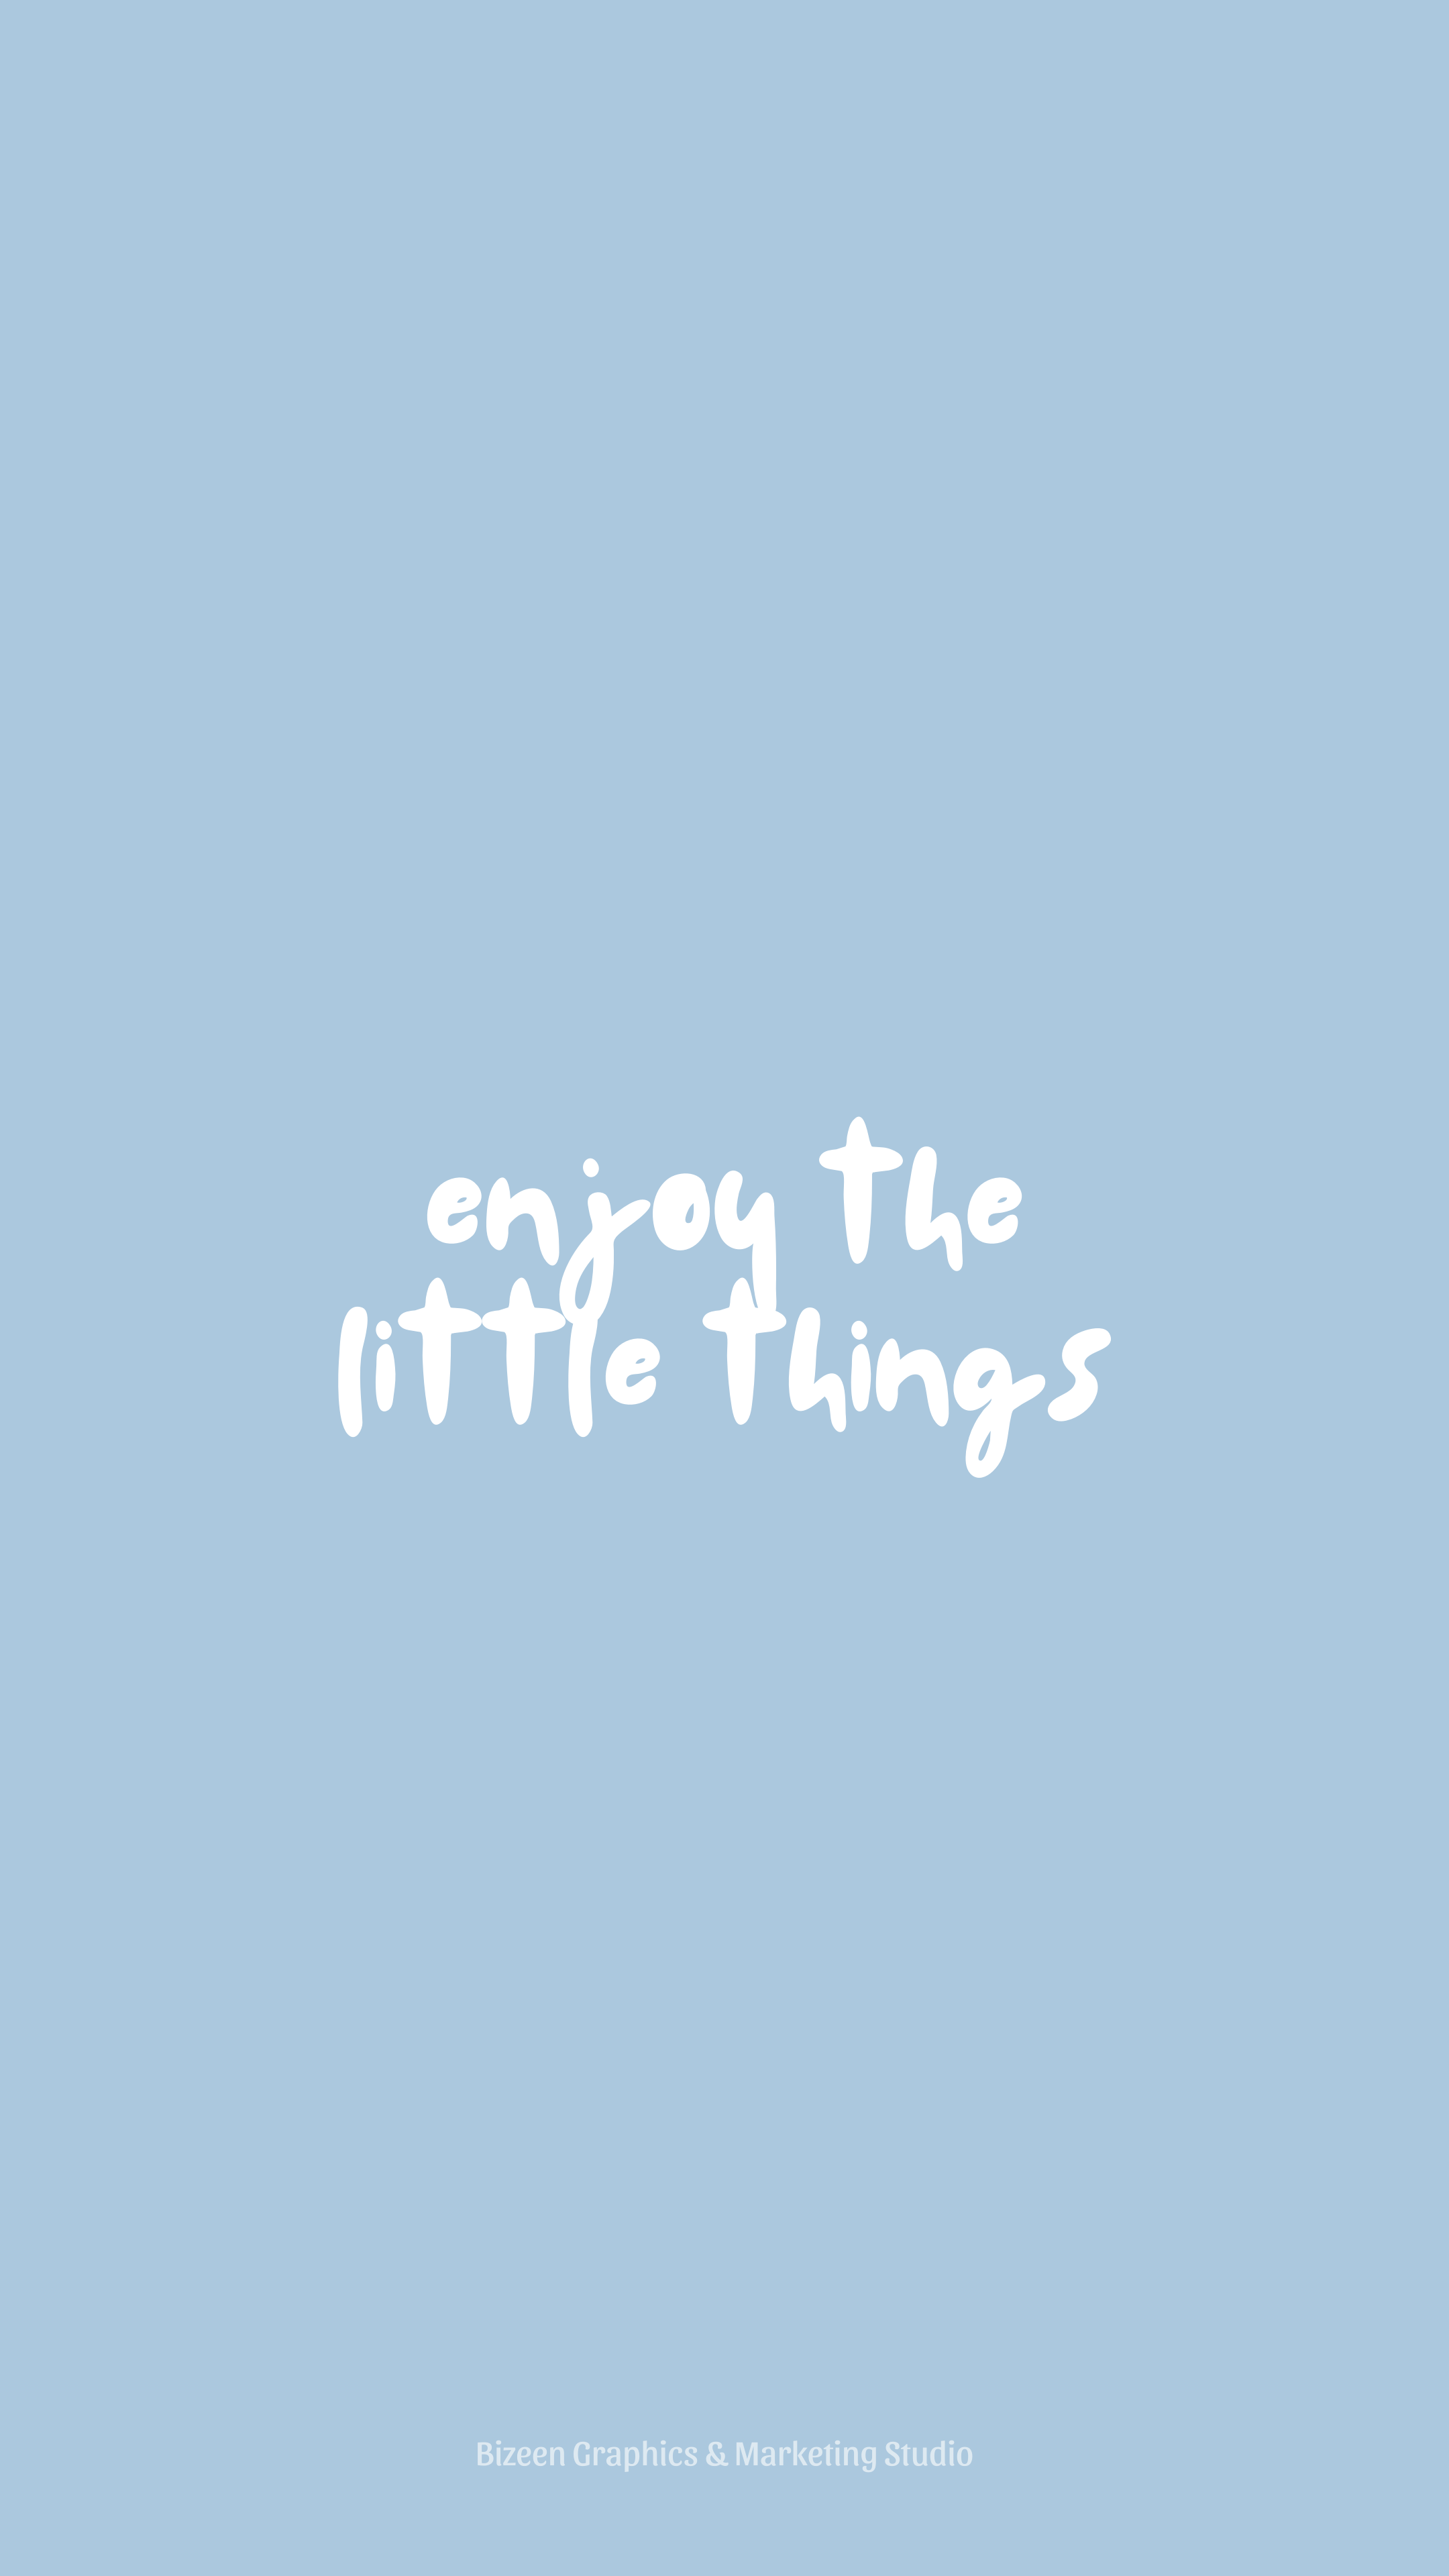 Pastel Blue Aesthetic Wallpaper Quotes. Enjoy the little things. Blue quotes, Baby blue quotes, Pastel quotes